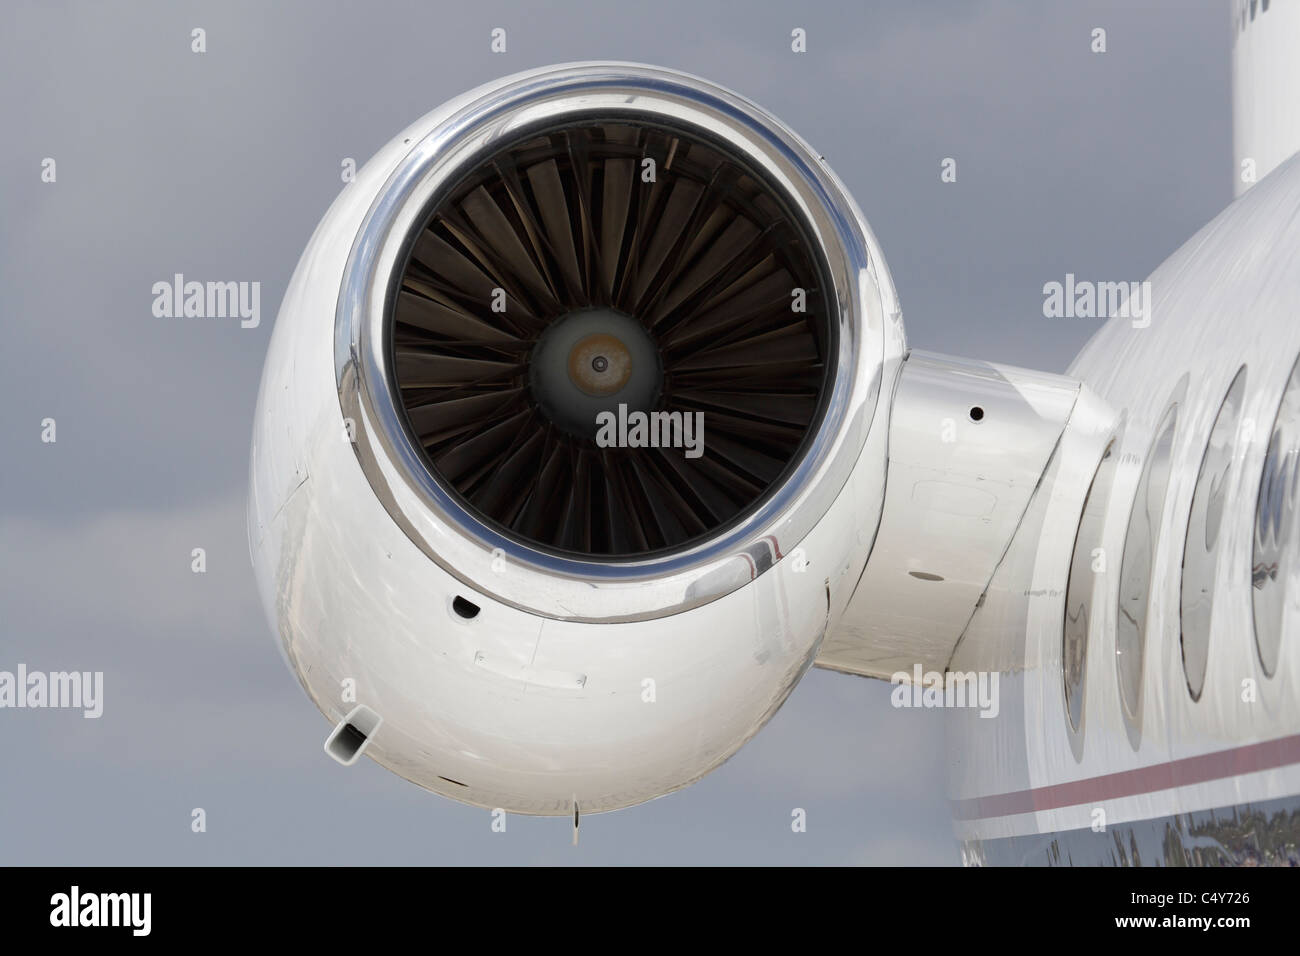 Closeup of a turbofan jet engine on a private jet aircraft. No proprietary details visible. Stock Photo